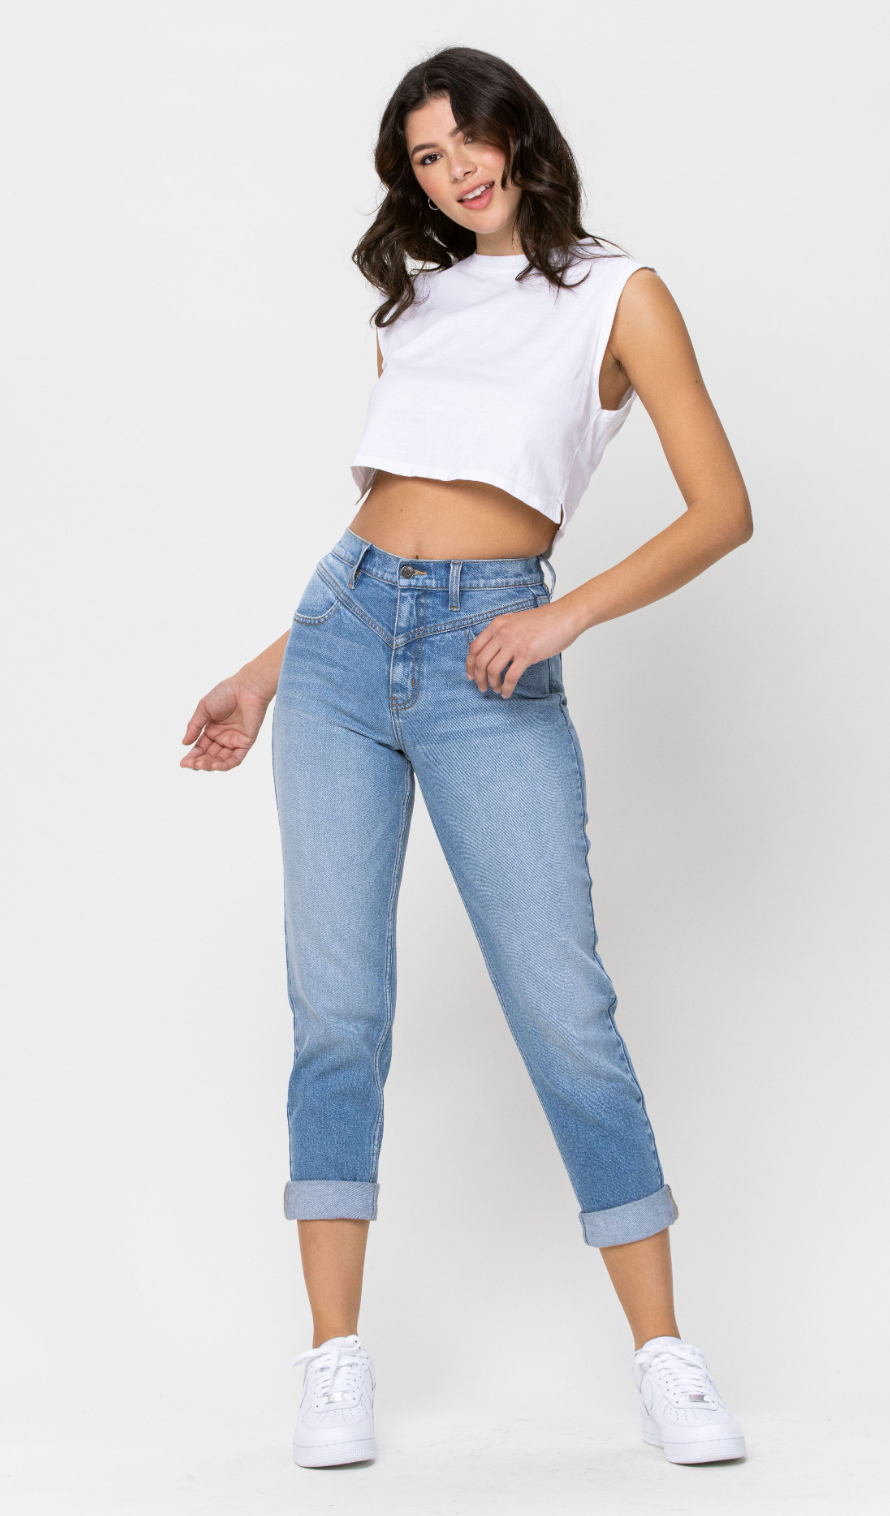 Go Ask Your Mom Jeans